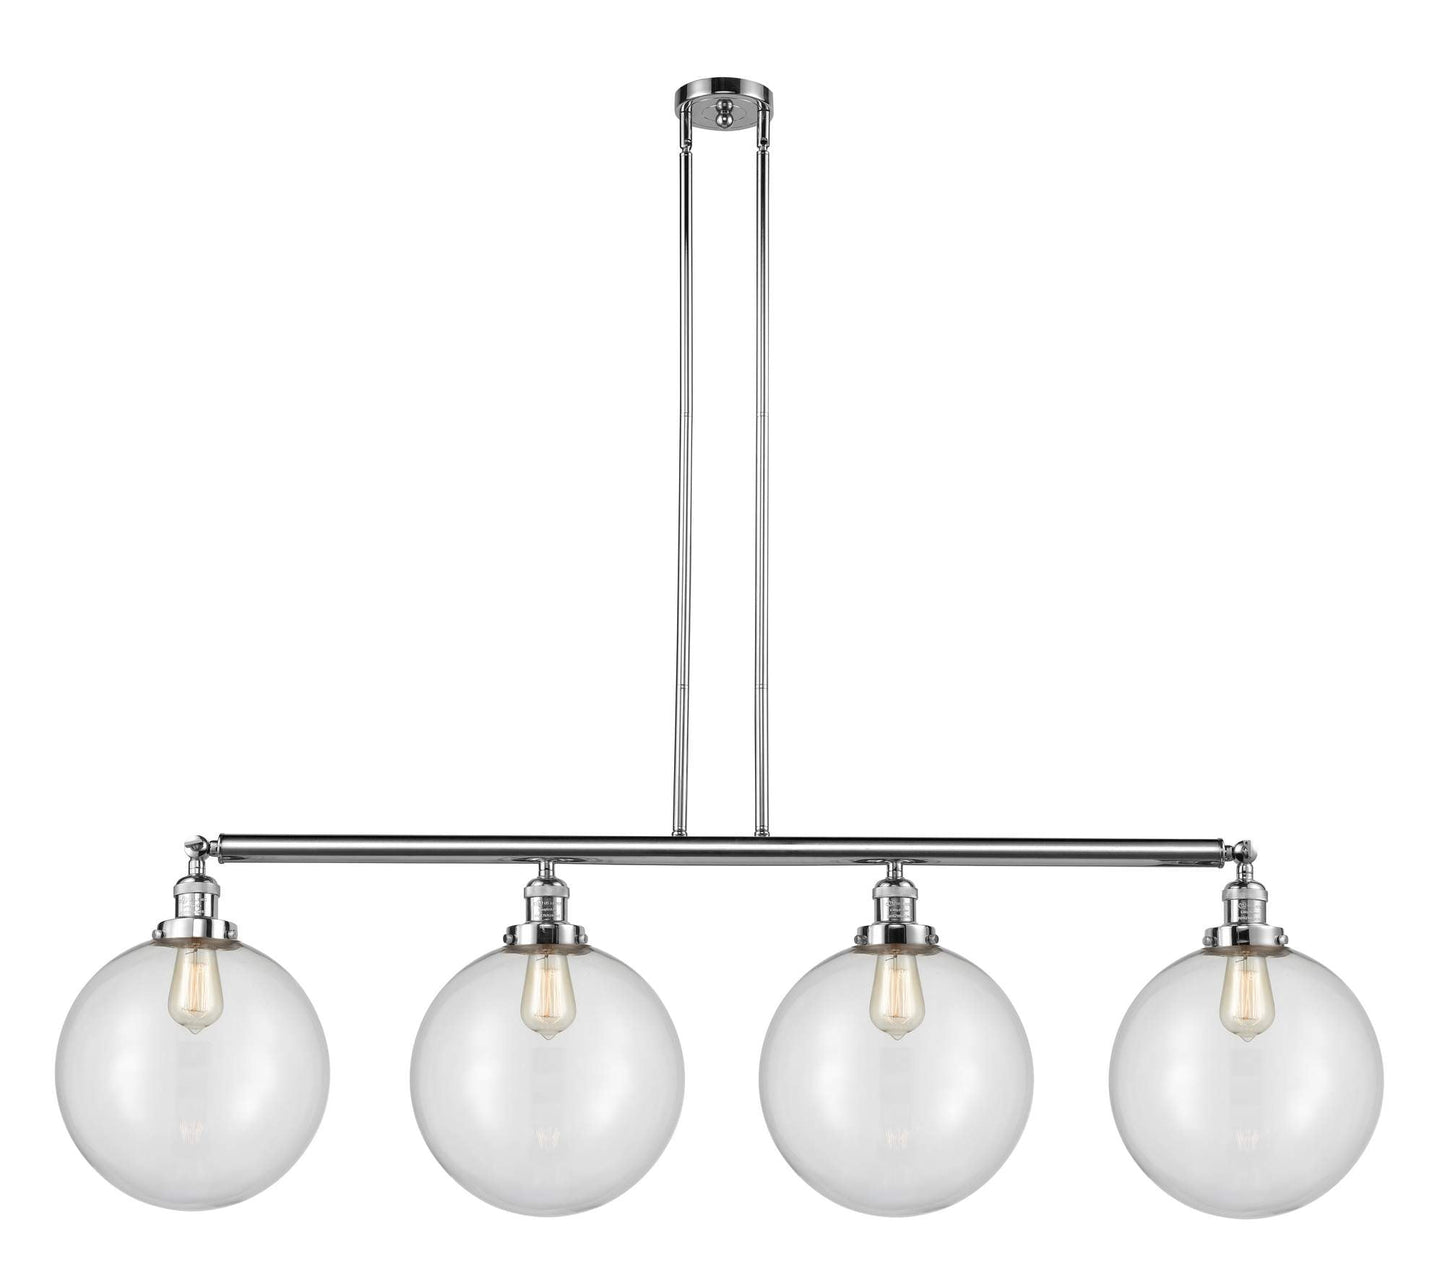 214-PC-G202-12 4-Light 56" Polished Chrome Island Light - Clear Beacon Glass - LED Bulb - Dimmensions: 56 x 12 x 16<br>Minimum Height : 26<br>Maximum Height : 50 - Sloped Ceiling Compatible: Yes